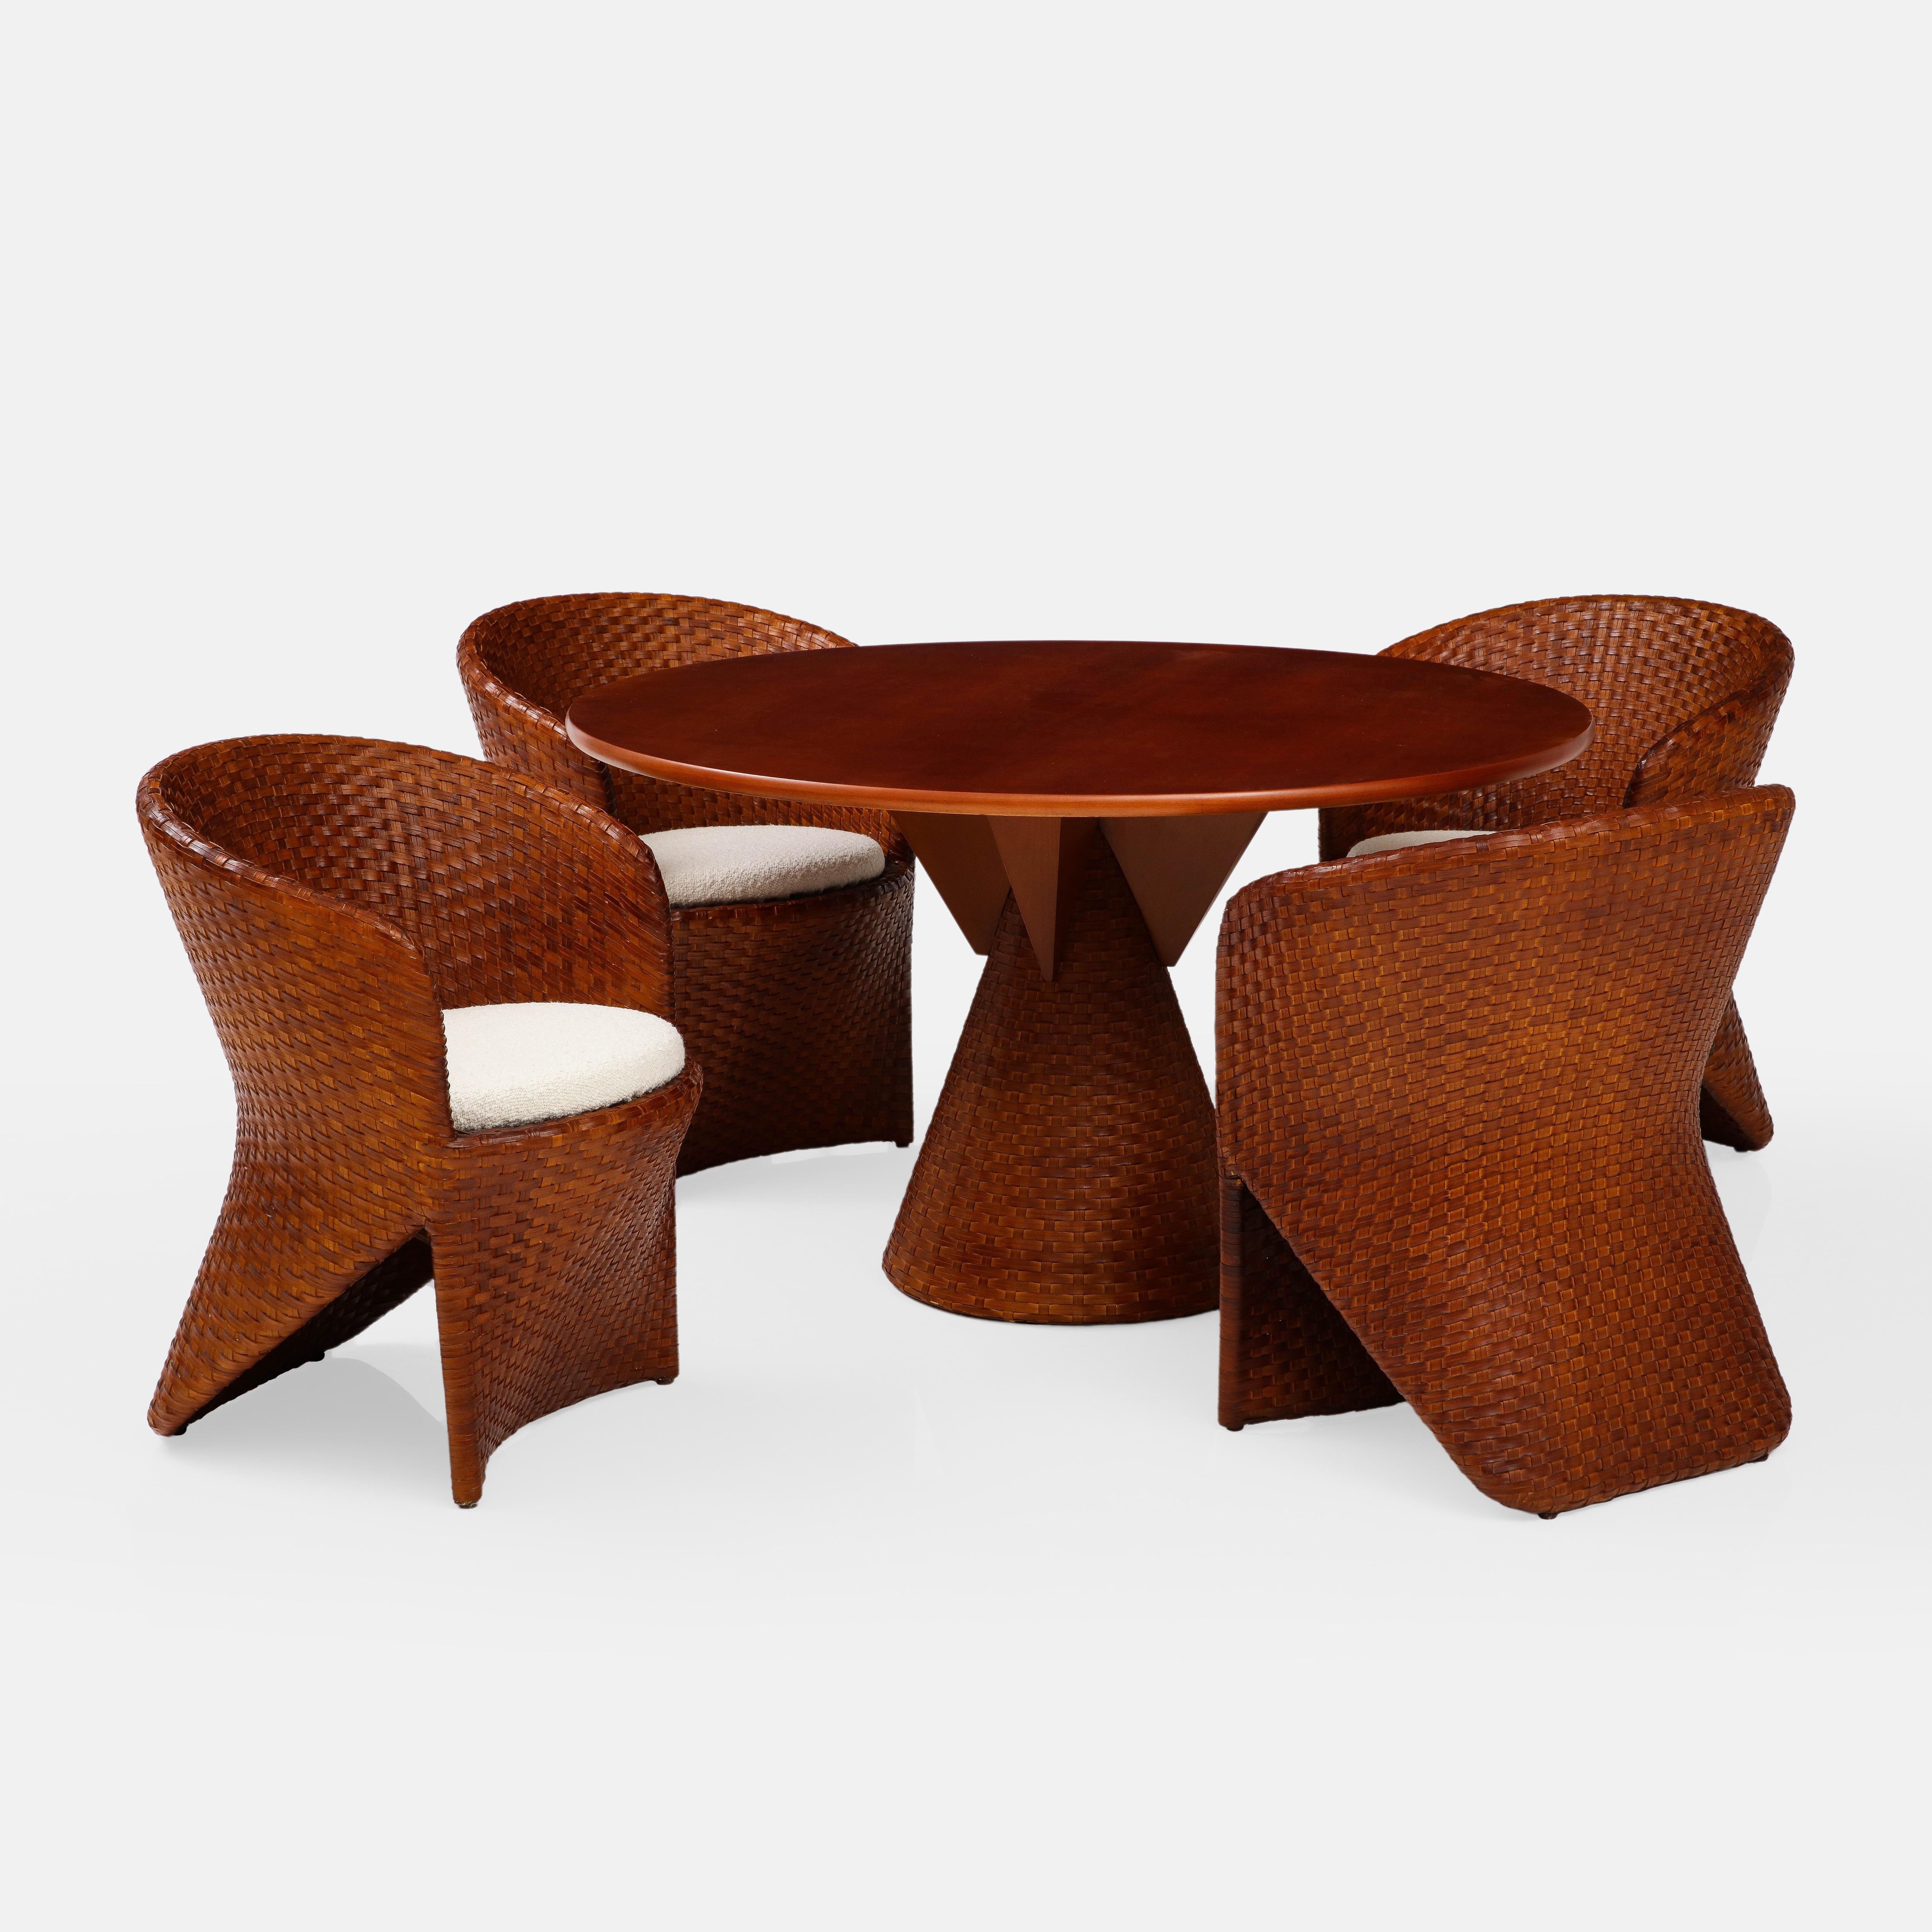 Tito Agnoli for Pierantonio Bonacina rare exquisite Carabou dining set consisting of a round cherry wood and rattan dining table and four woven rattan dining chairs. This architectural dining table has a cherry wood top and a woven rattan conical